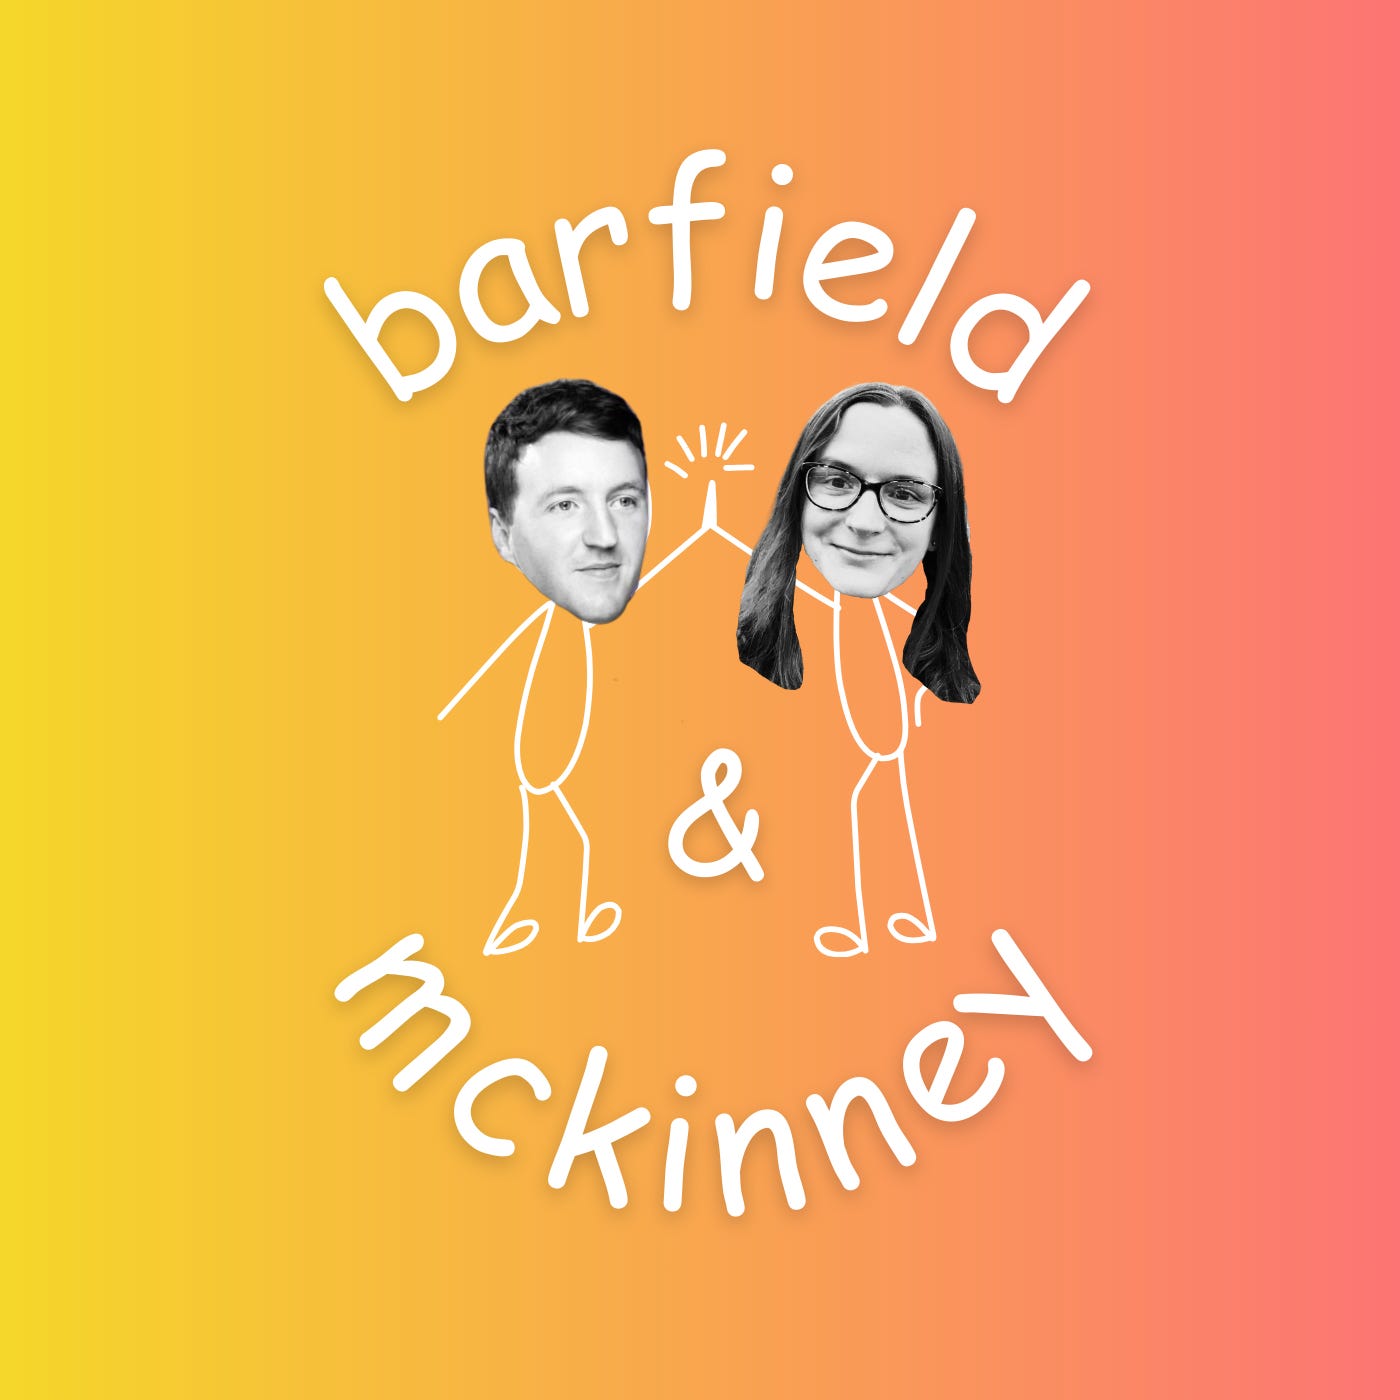 Barfield & McKinney's Podcast Experiment